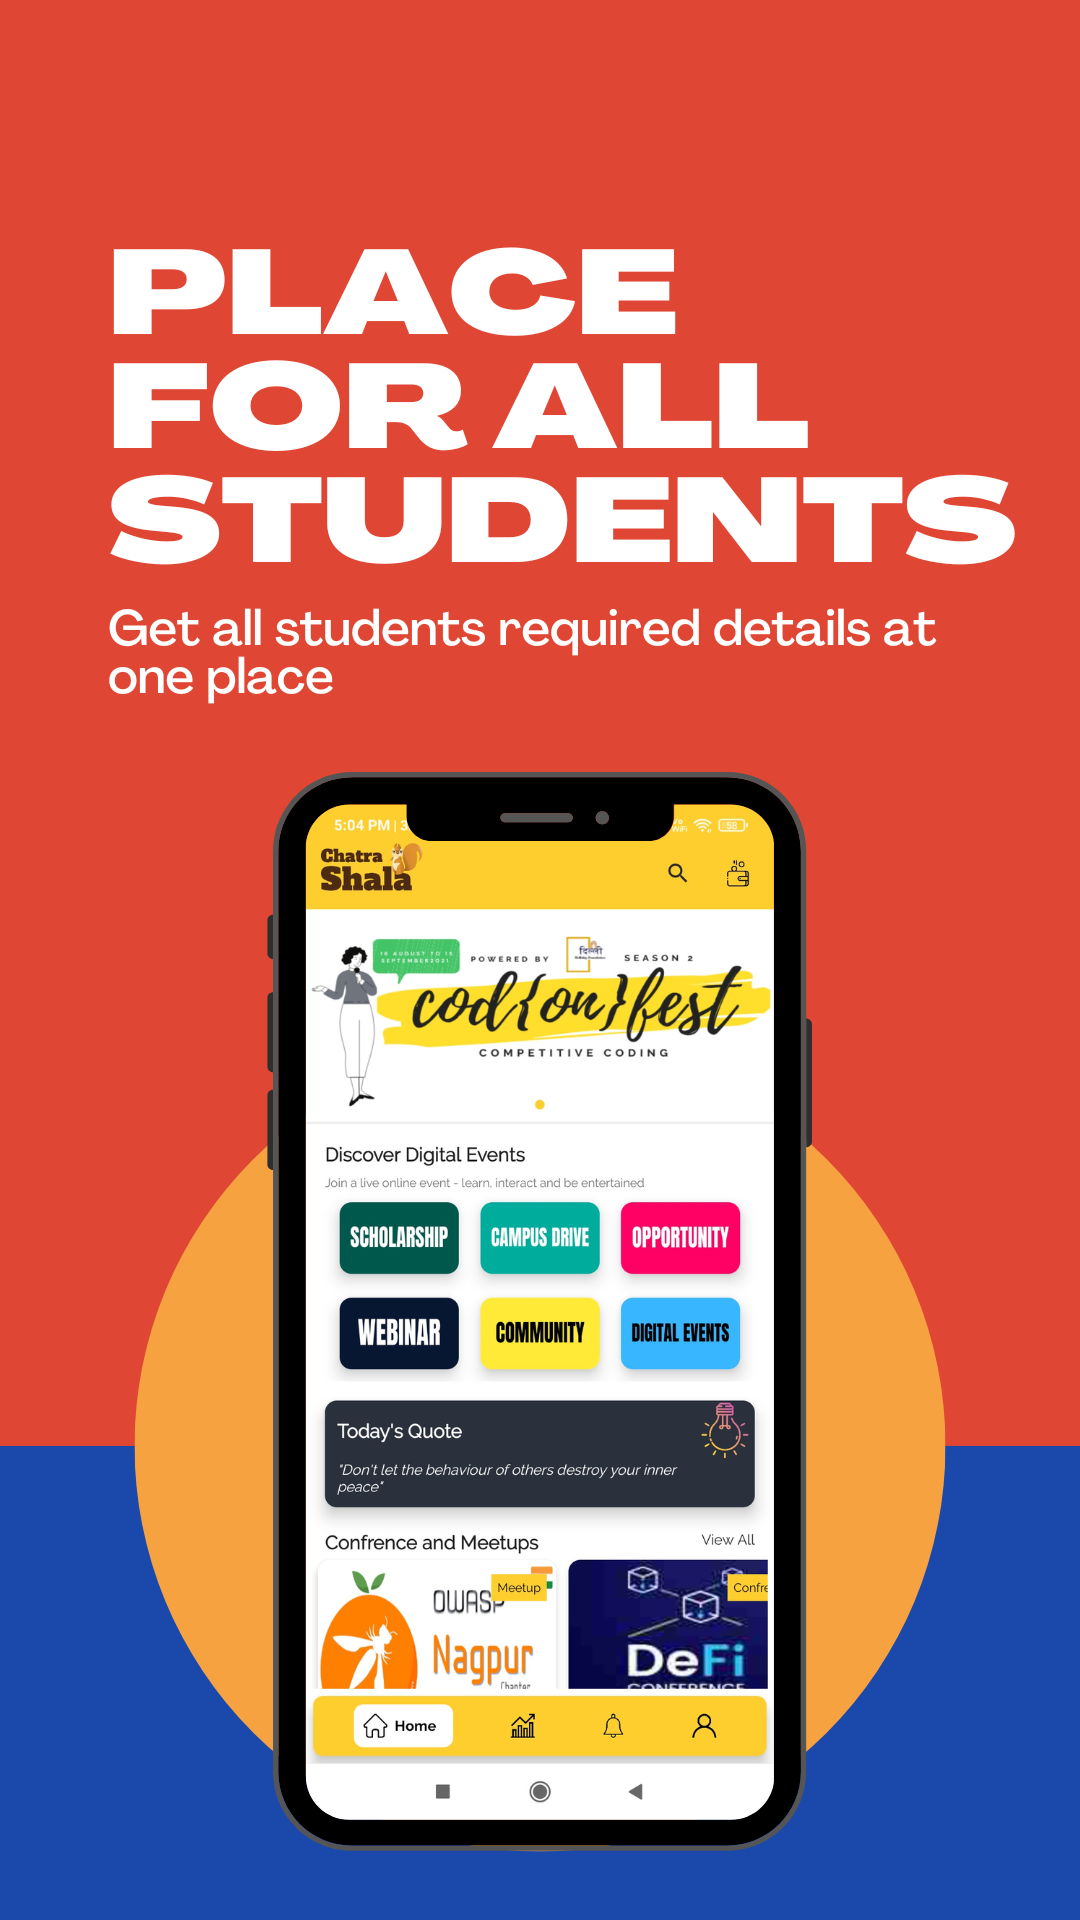 place for all students, get all students required details at one place